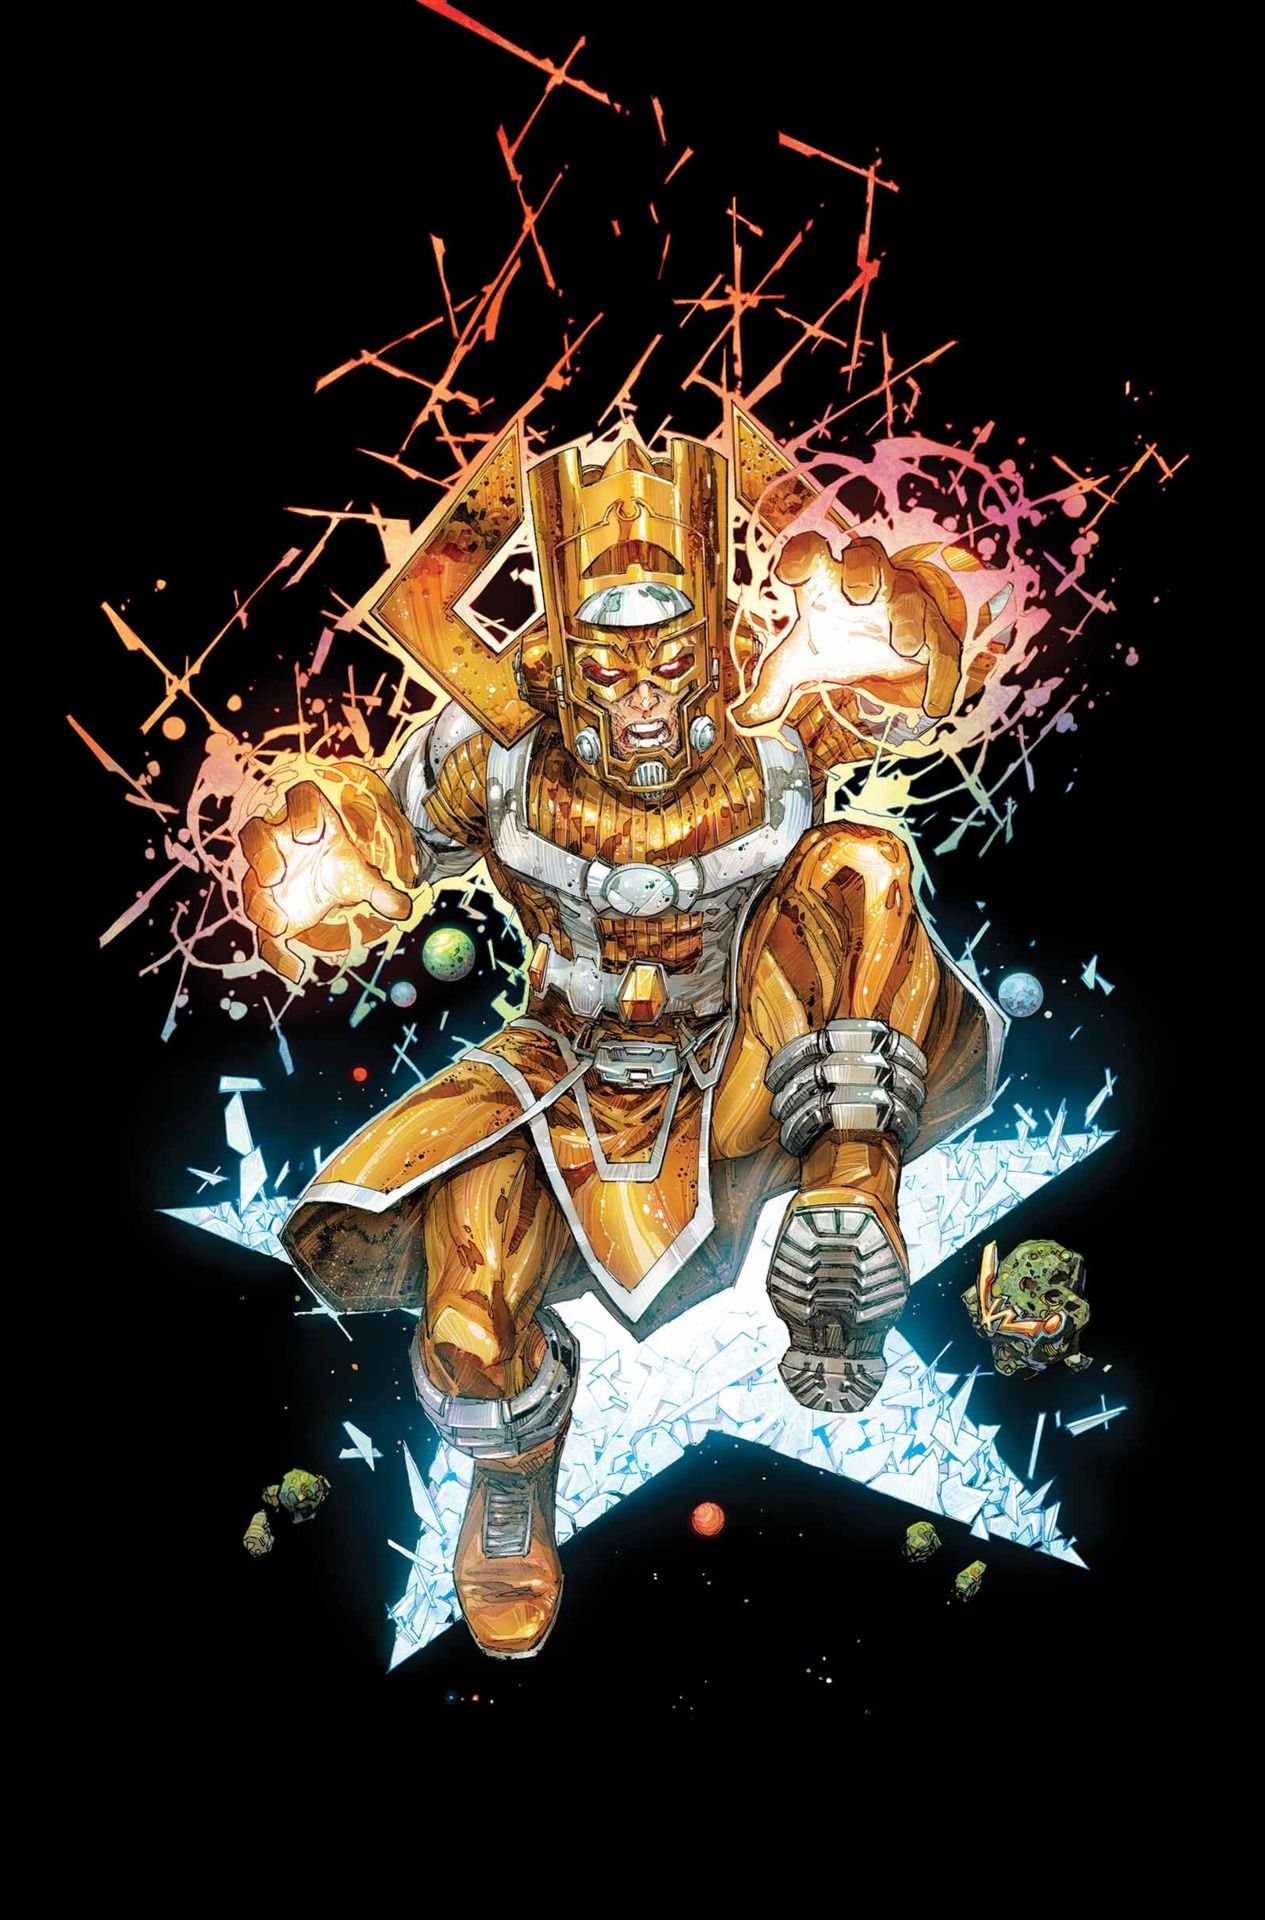 Can someone make this image of Galactus, Lifebringer, into a